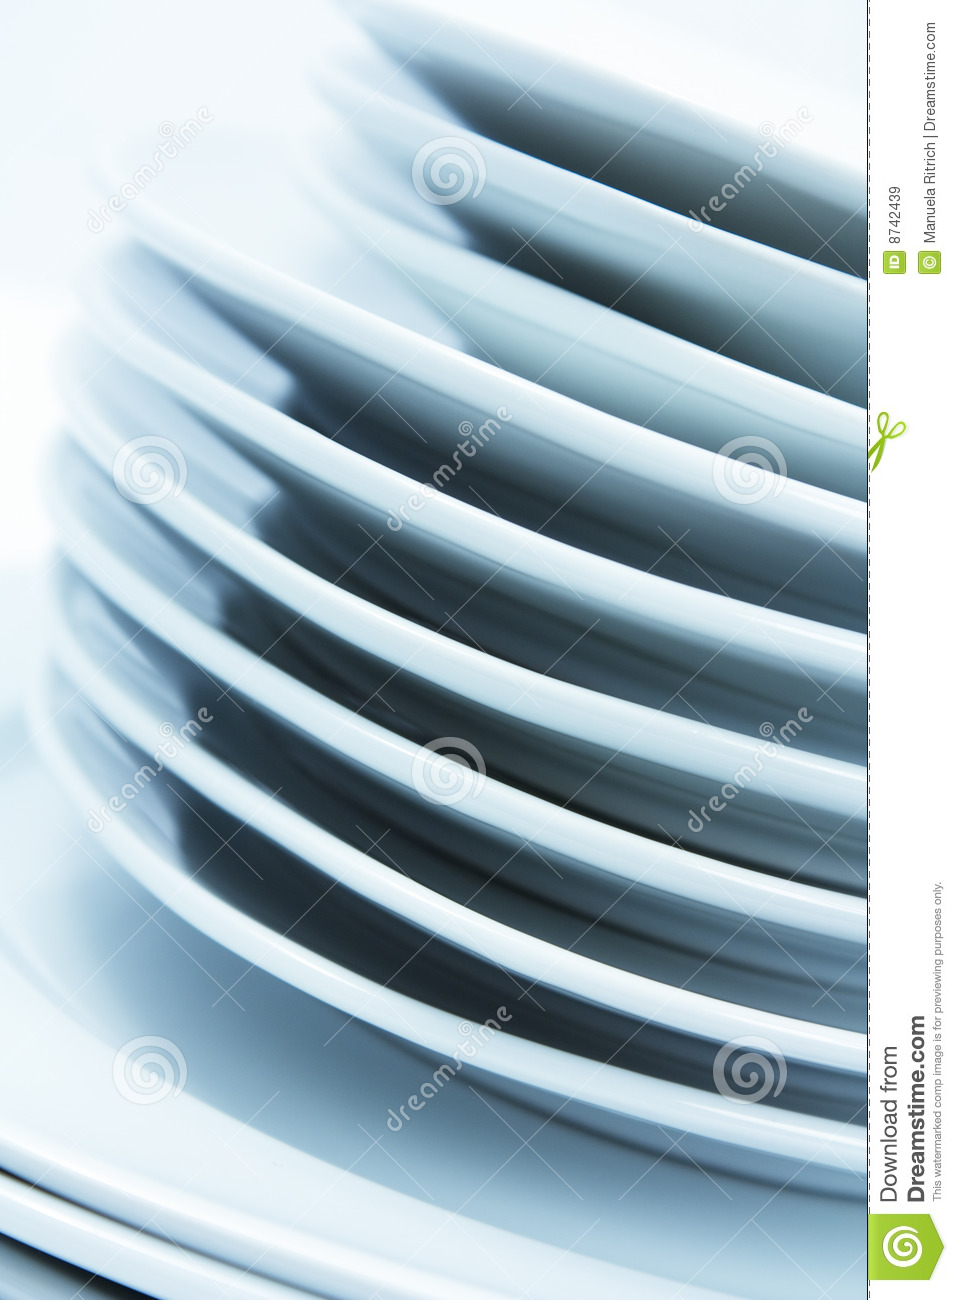 Stacked Plates Royalty Free Stock Images   Image  8742439